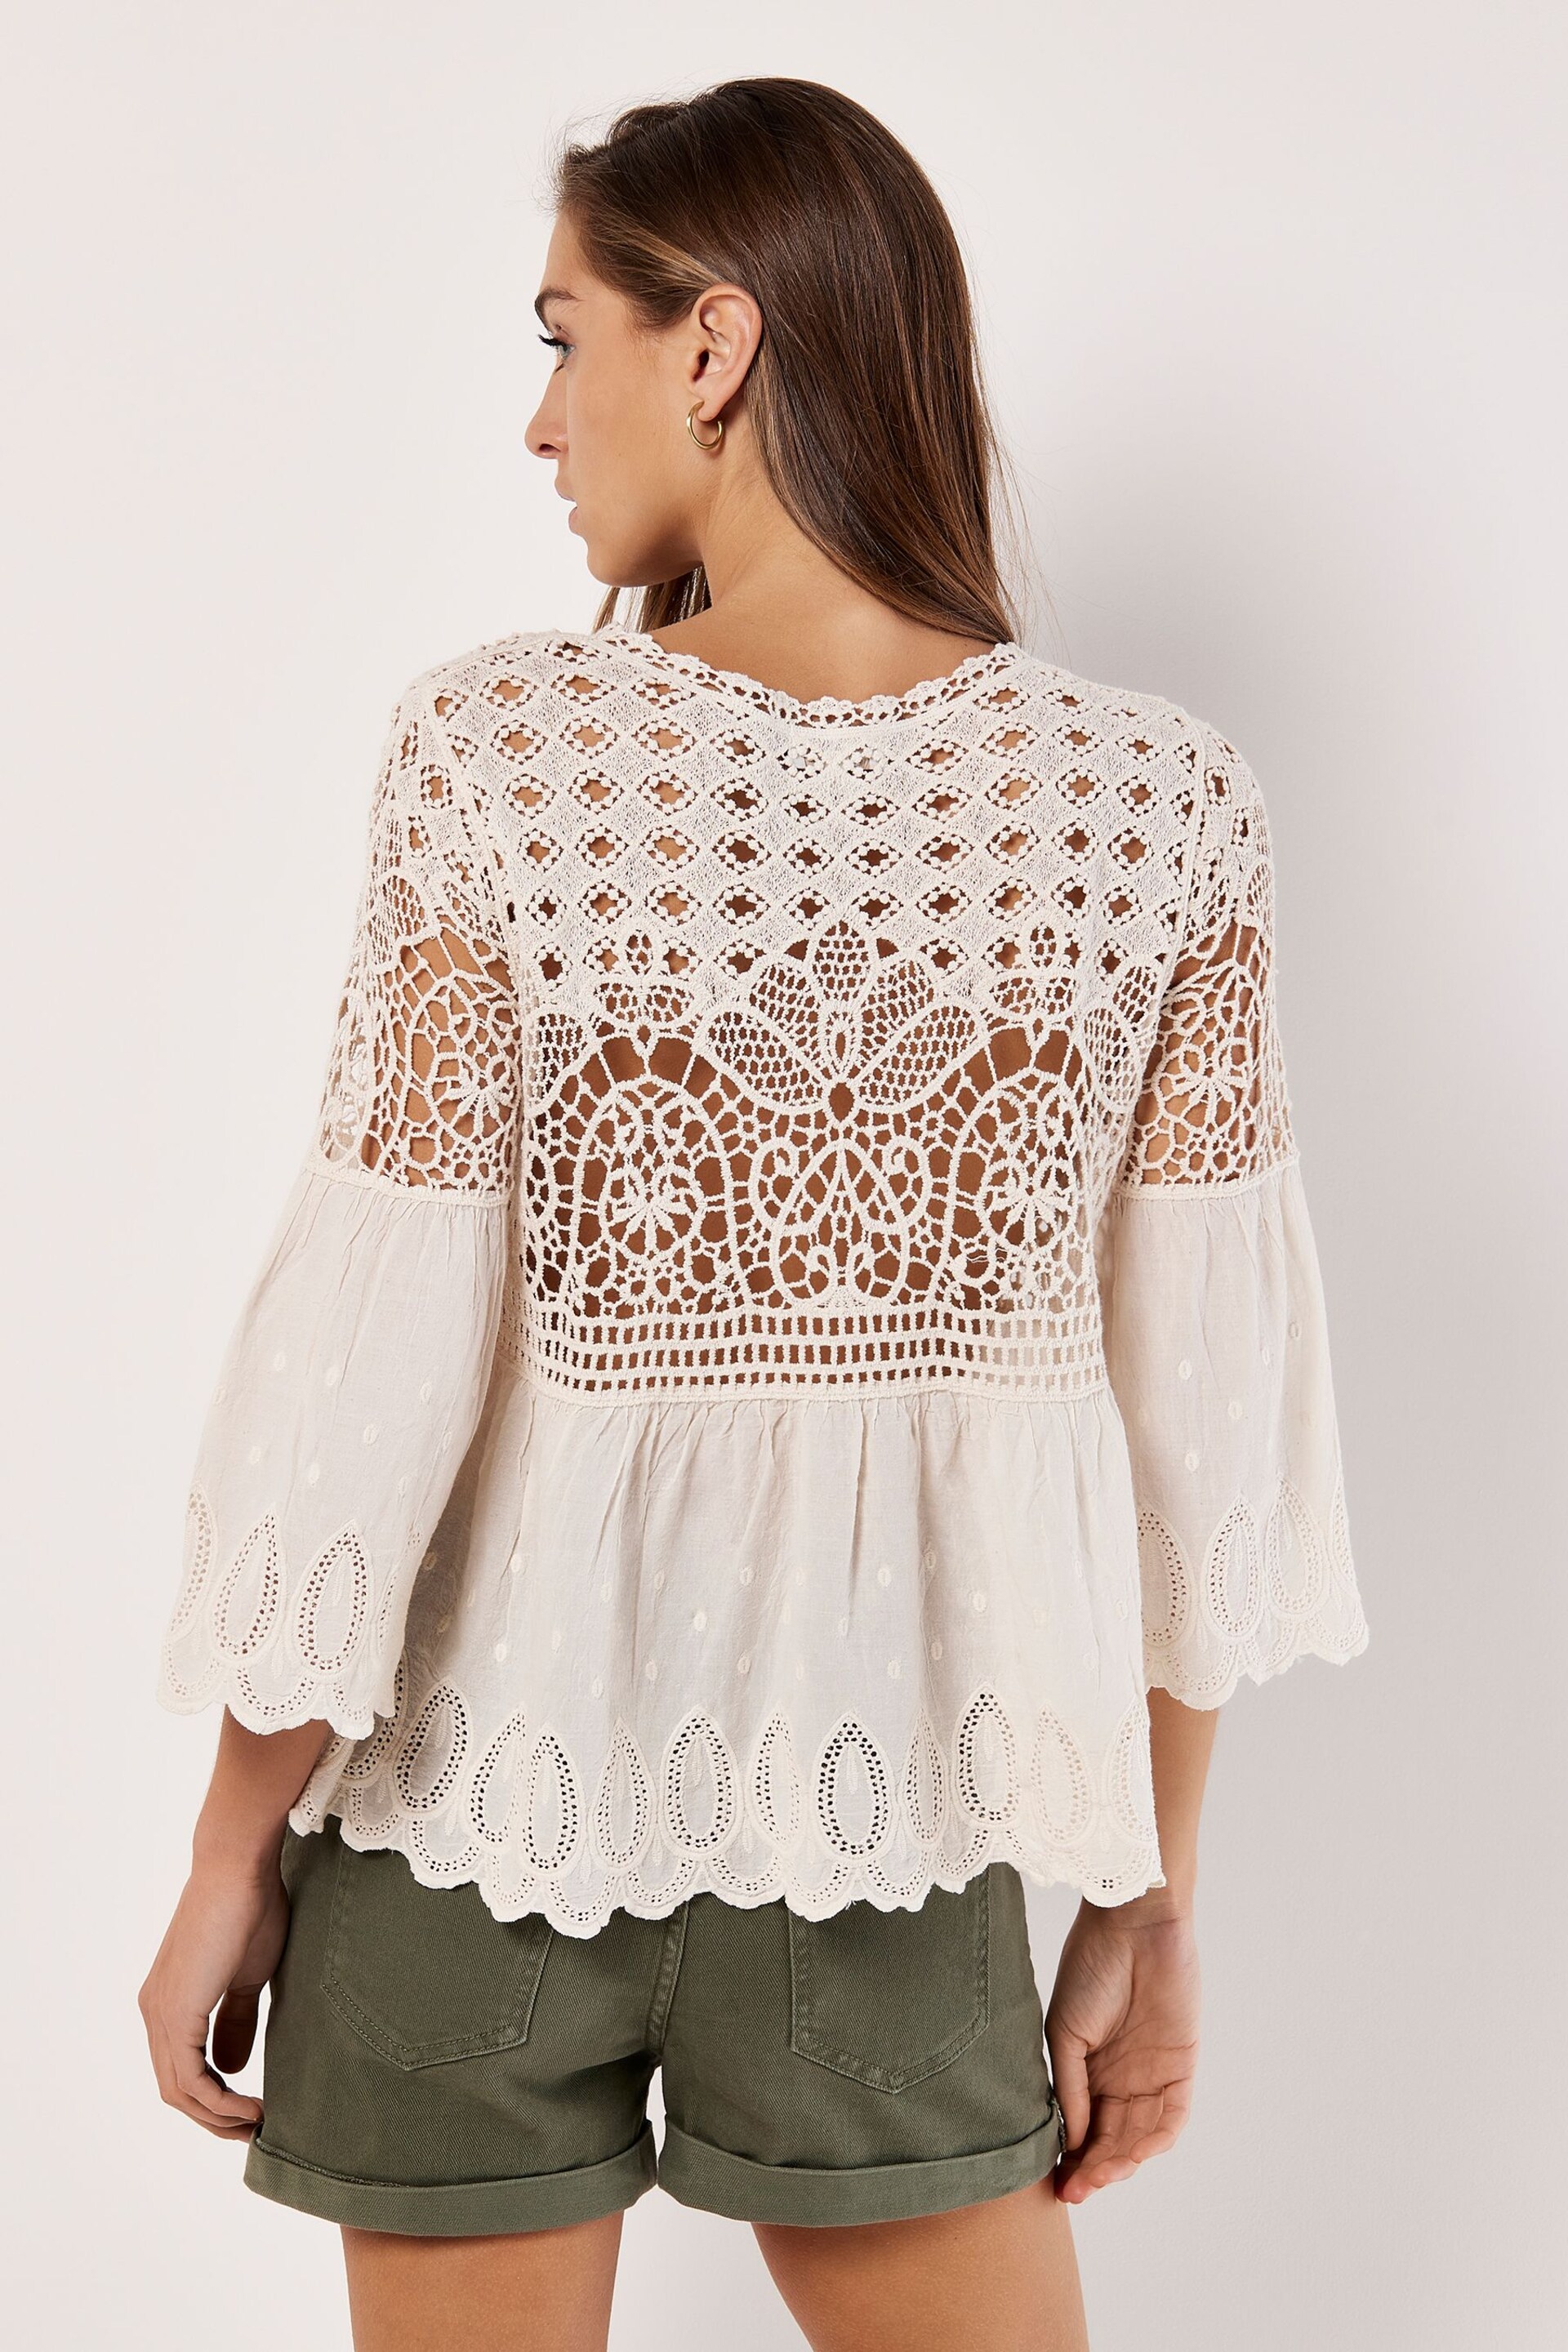 Apricot Natural Crochet Lace & Broderie Folk Top - Image 4 of 4